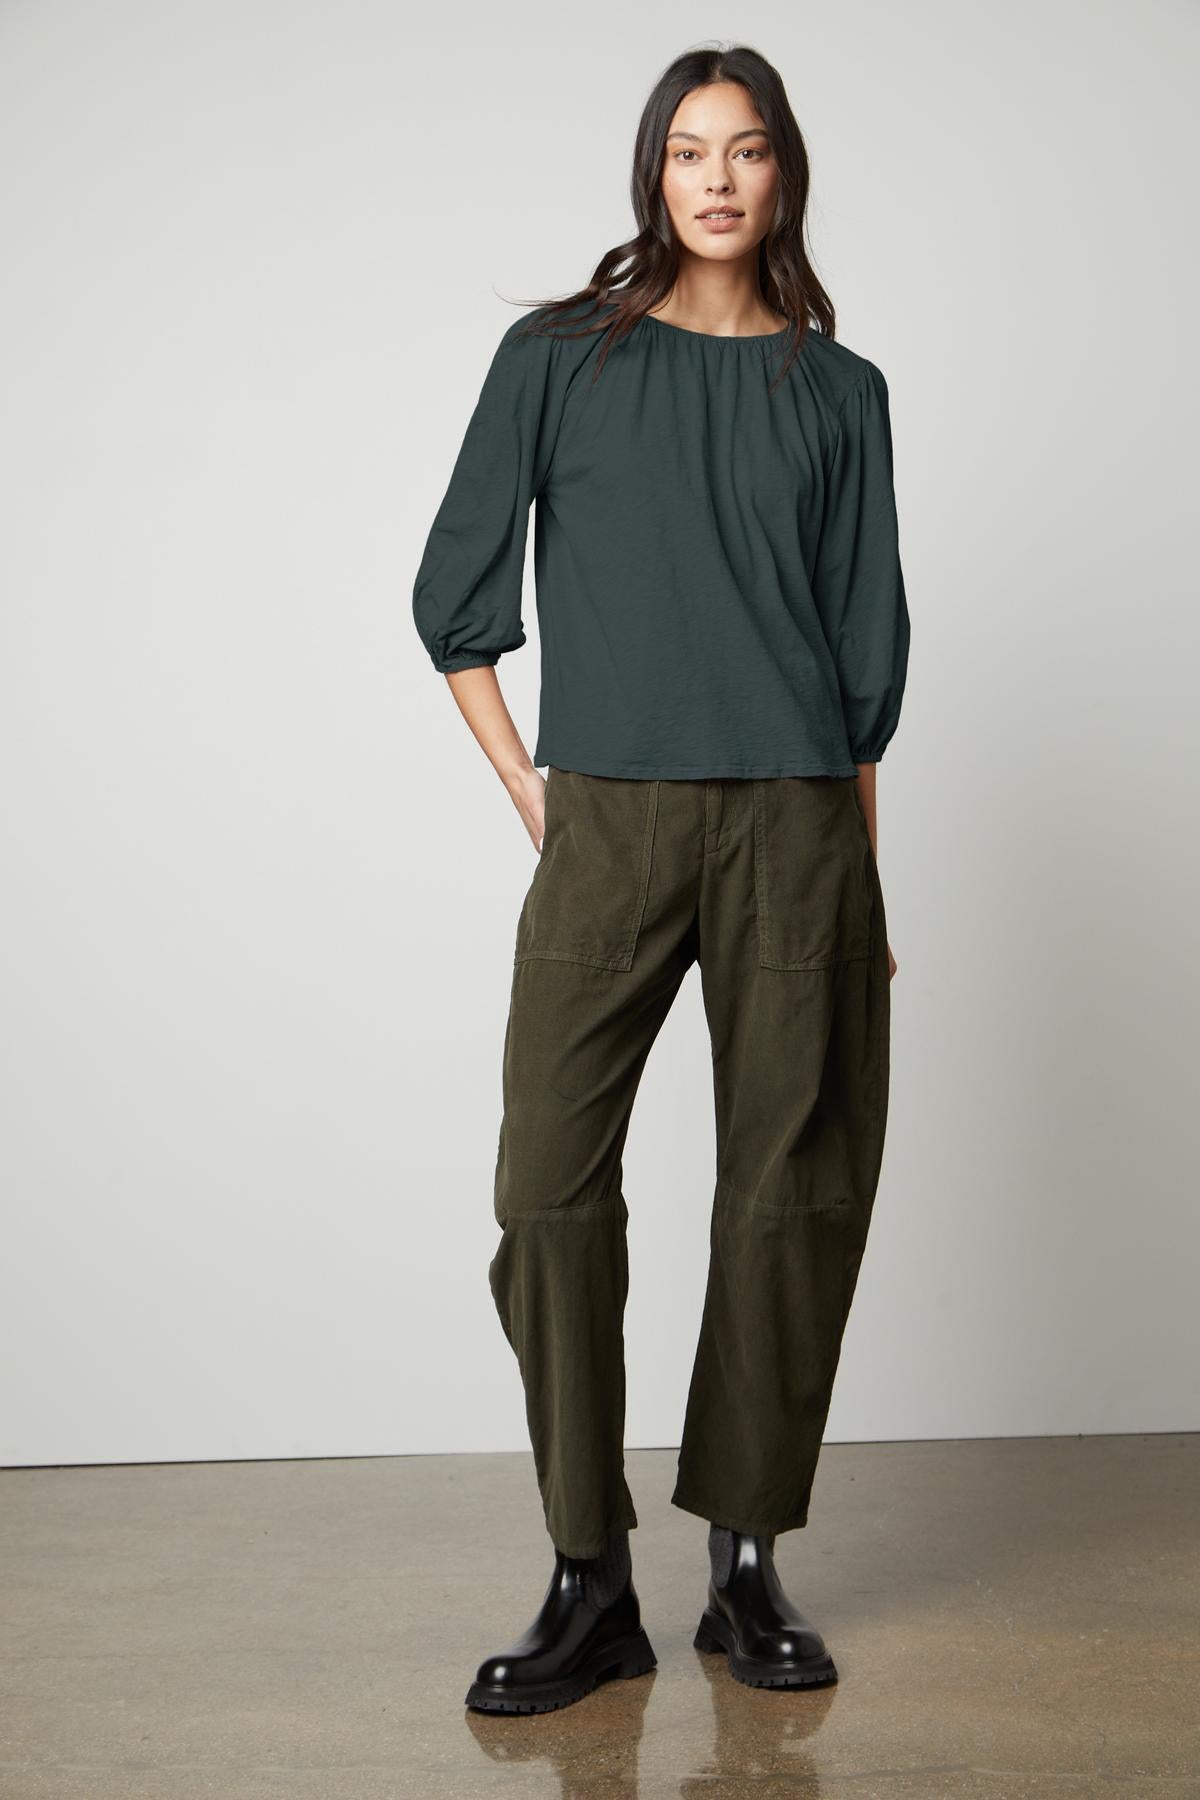 The model is wearing olive trousers and a Velvet by Graham & Spencer JULIE 3/4 SLEEVE TEE.-26727740178625